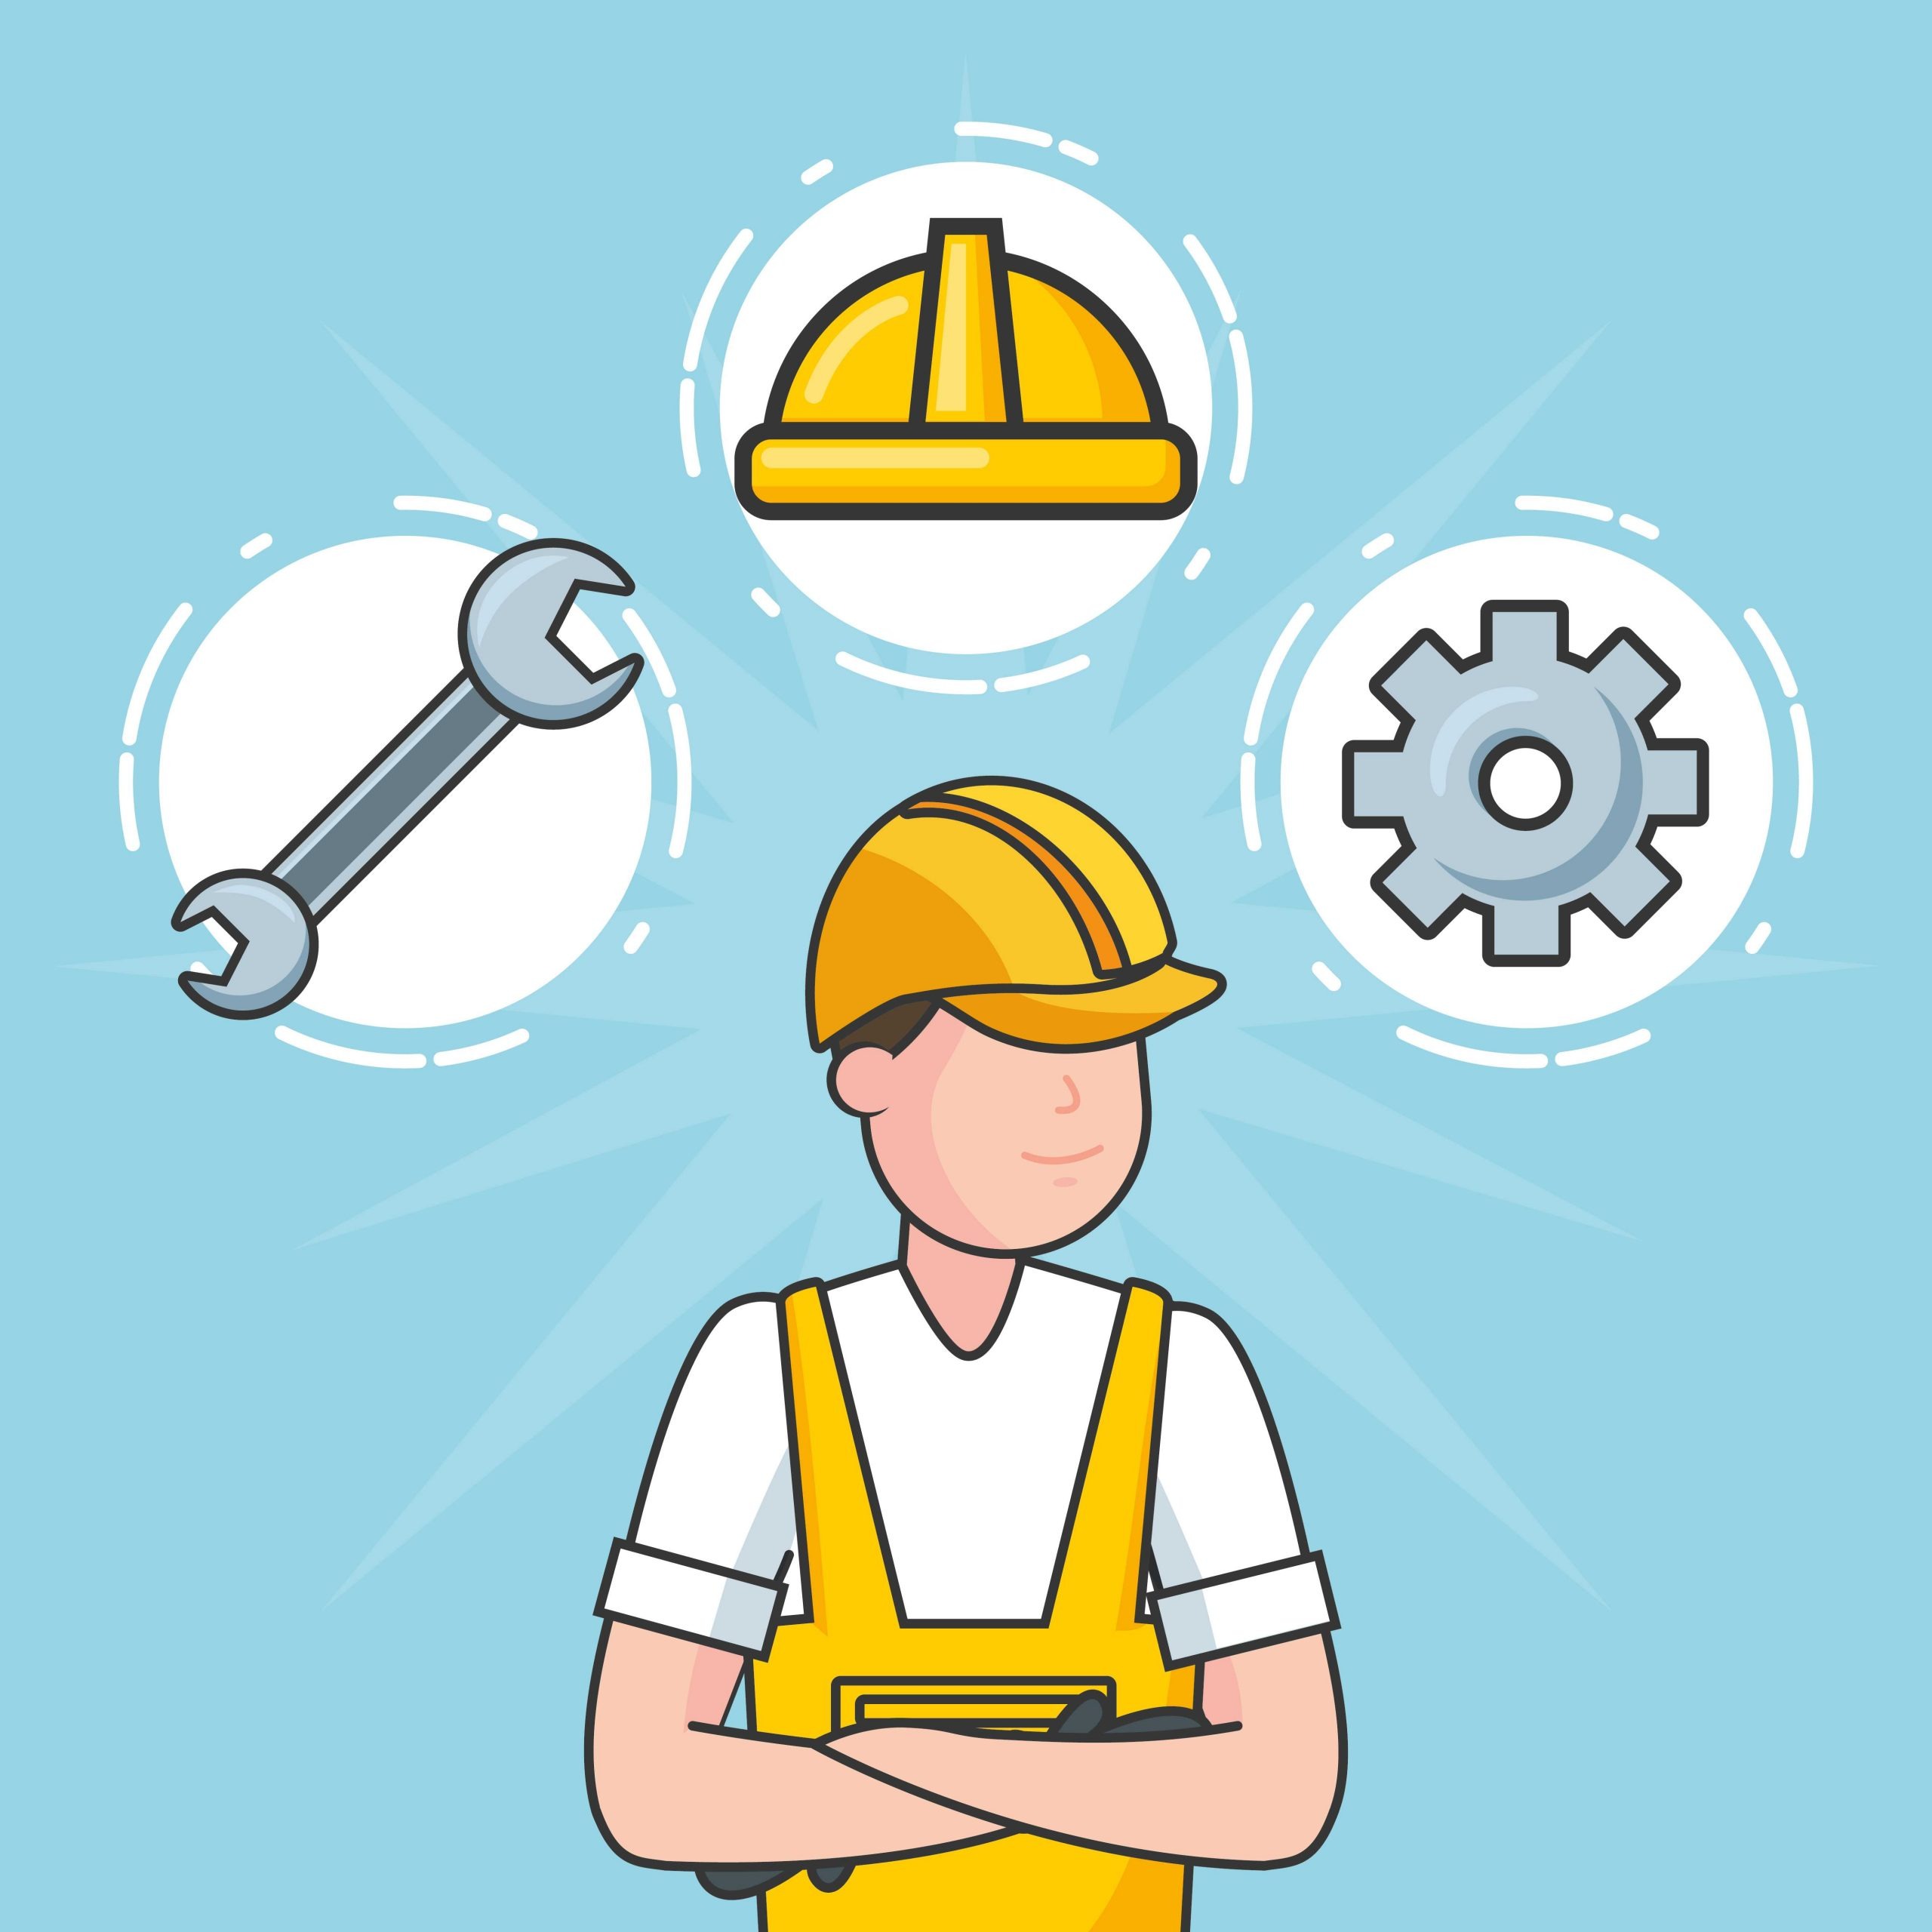 Happy Engineer's Day image download